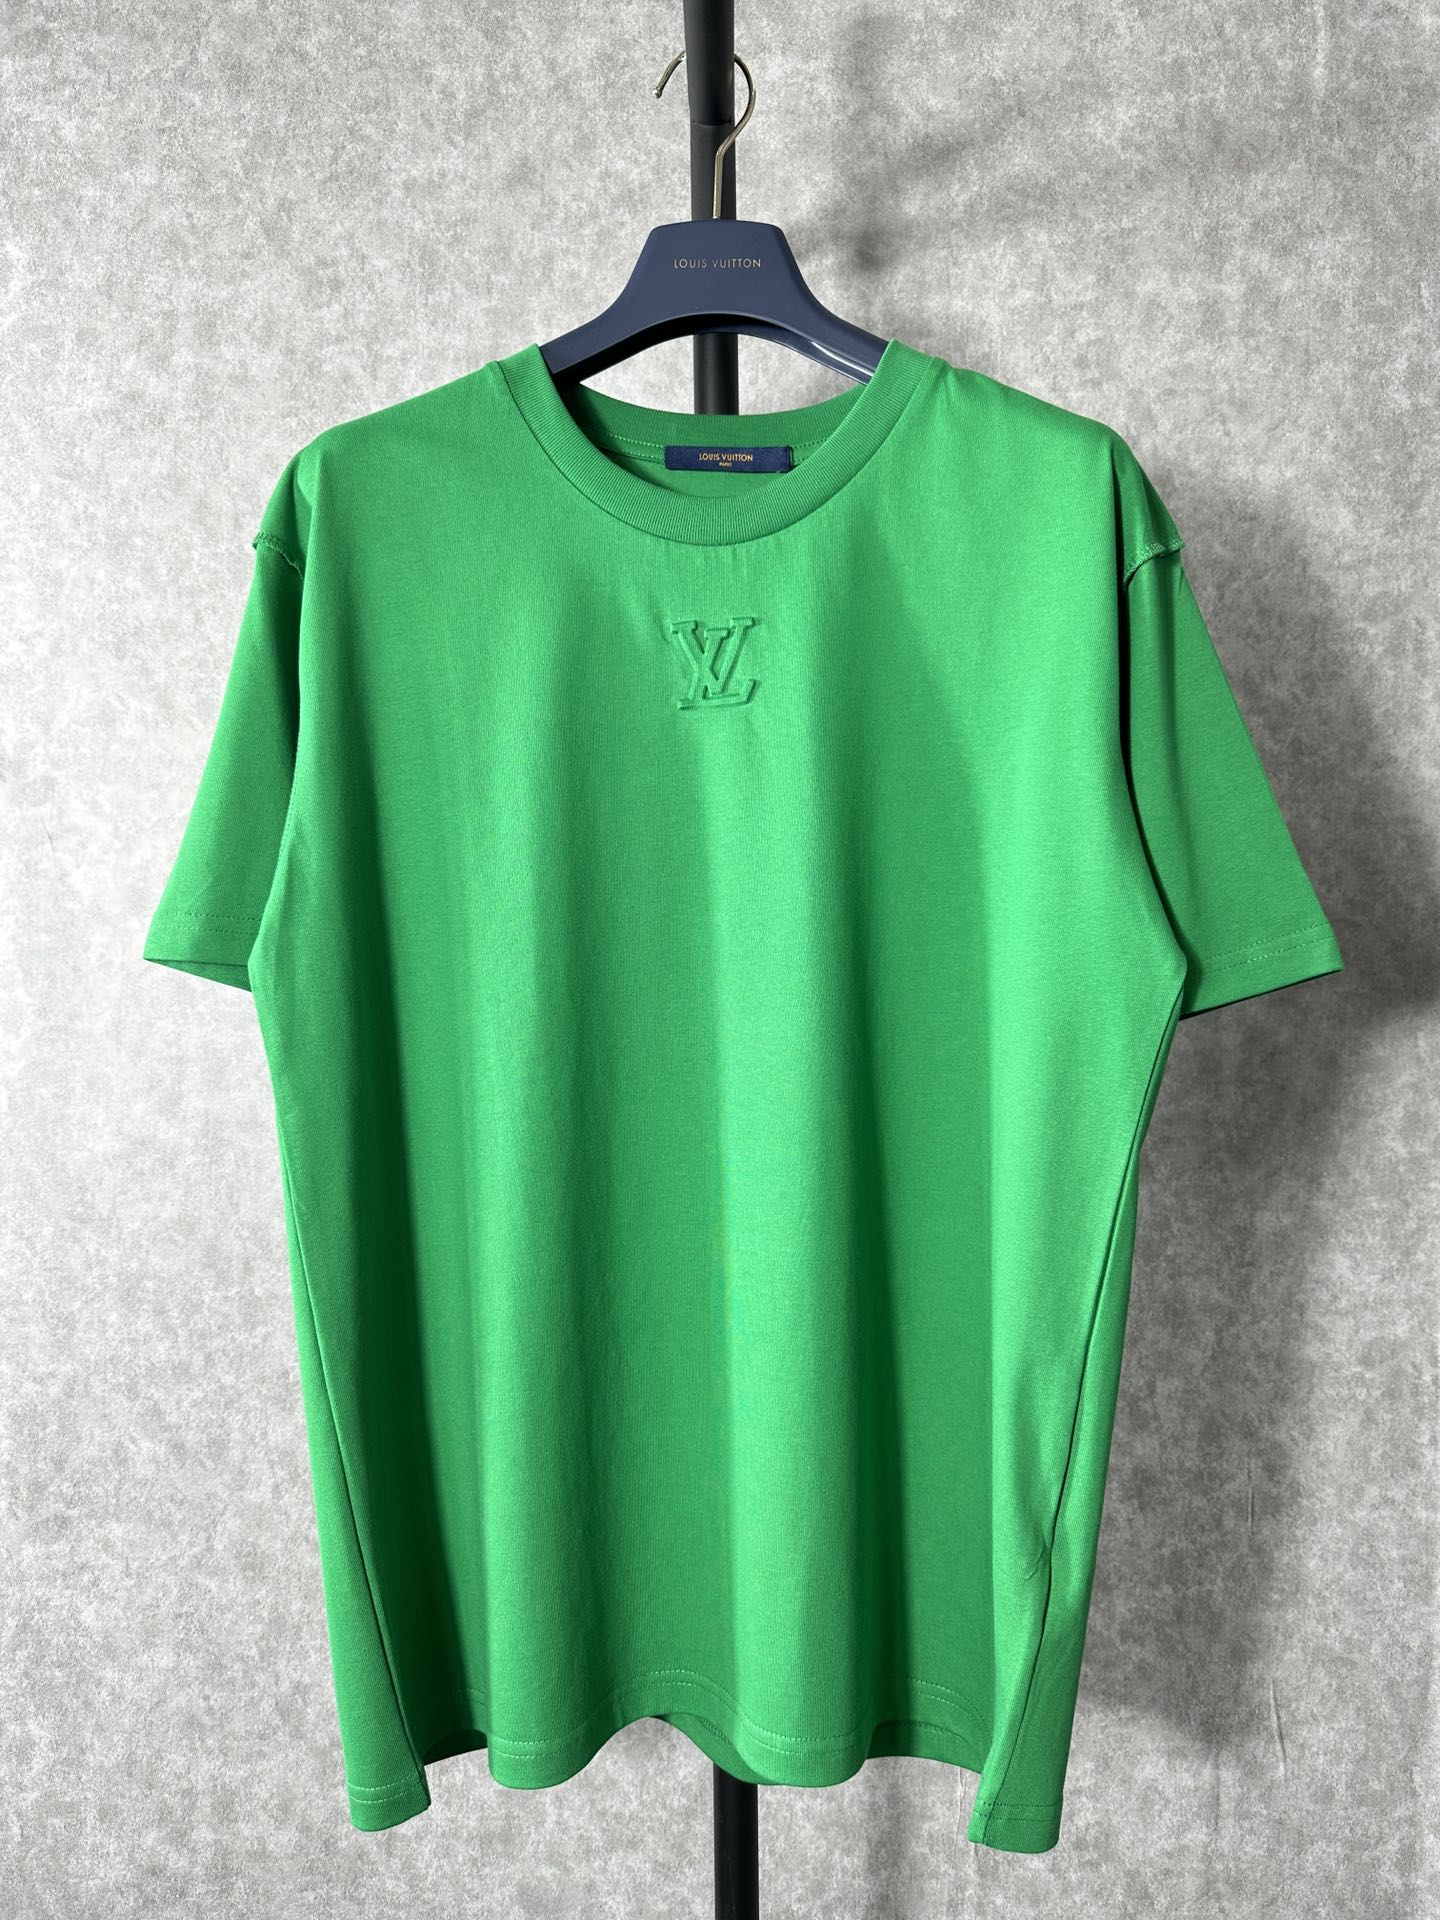 First Top
 Louis Vuitton Buy
 Clothing T-Shirt Green Unisex Cotton Spring/Summer Collection Short Sleeve